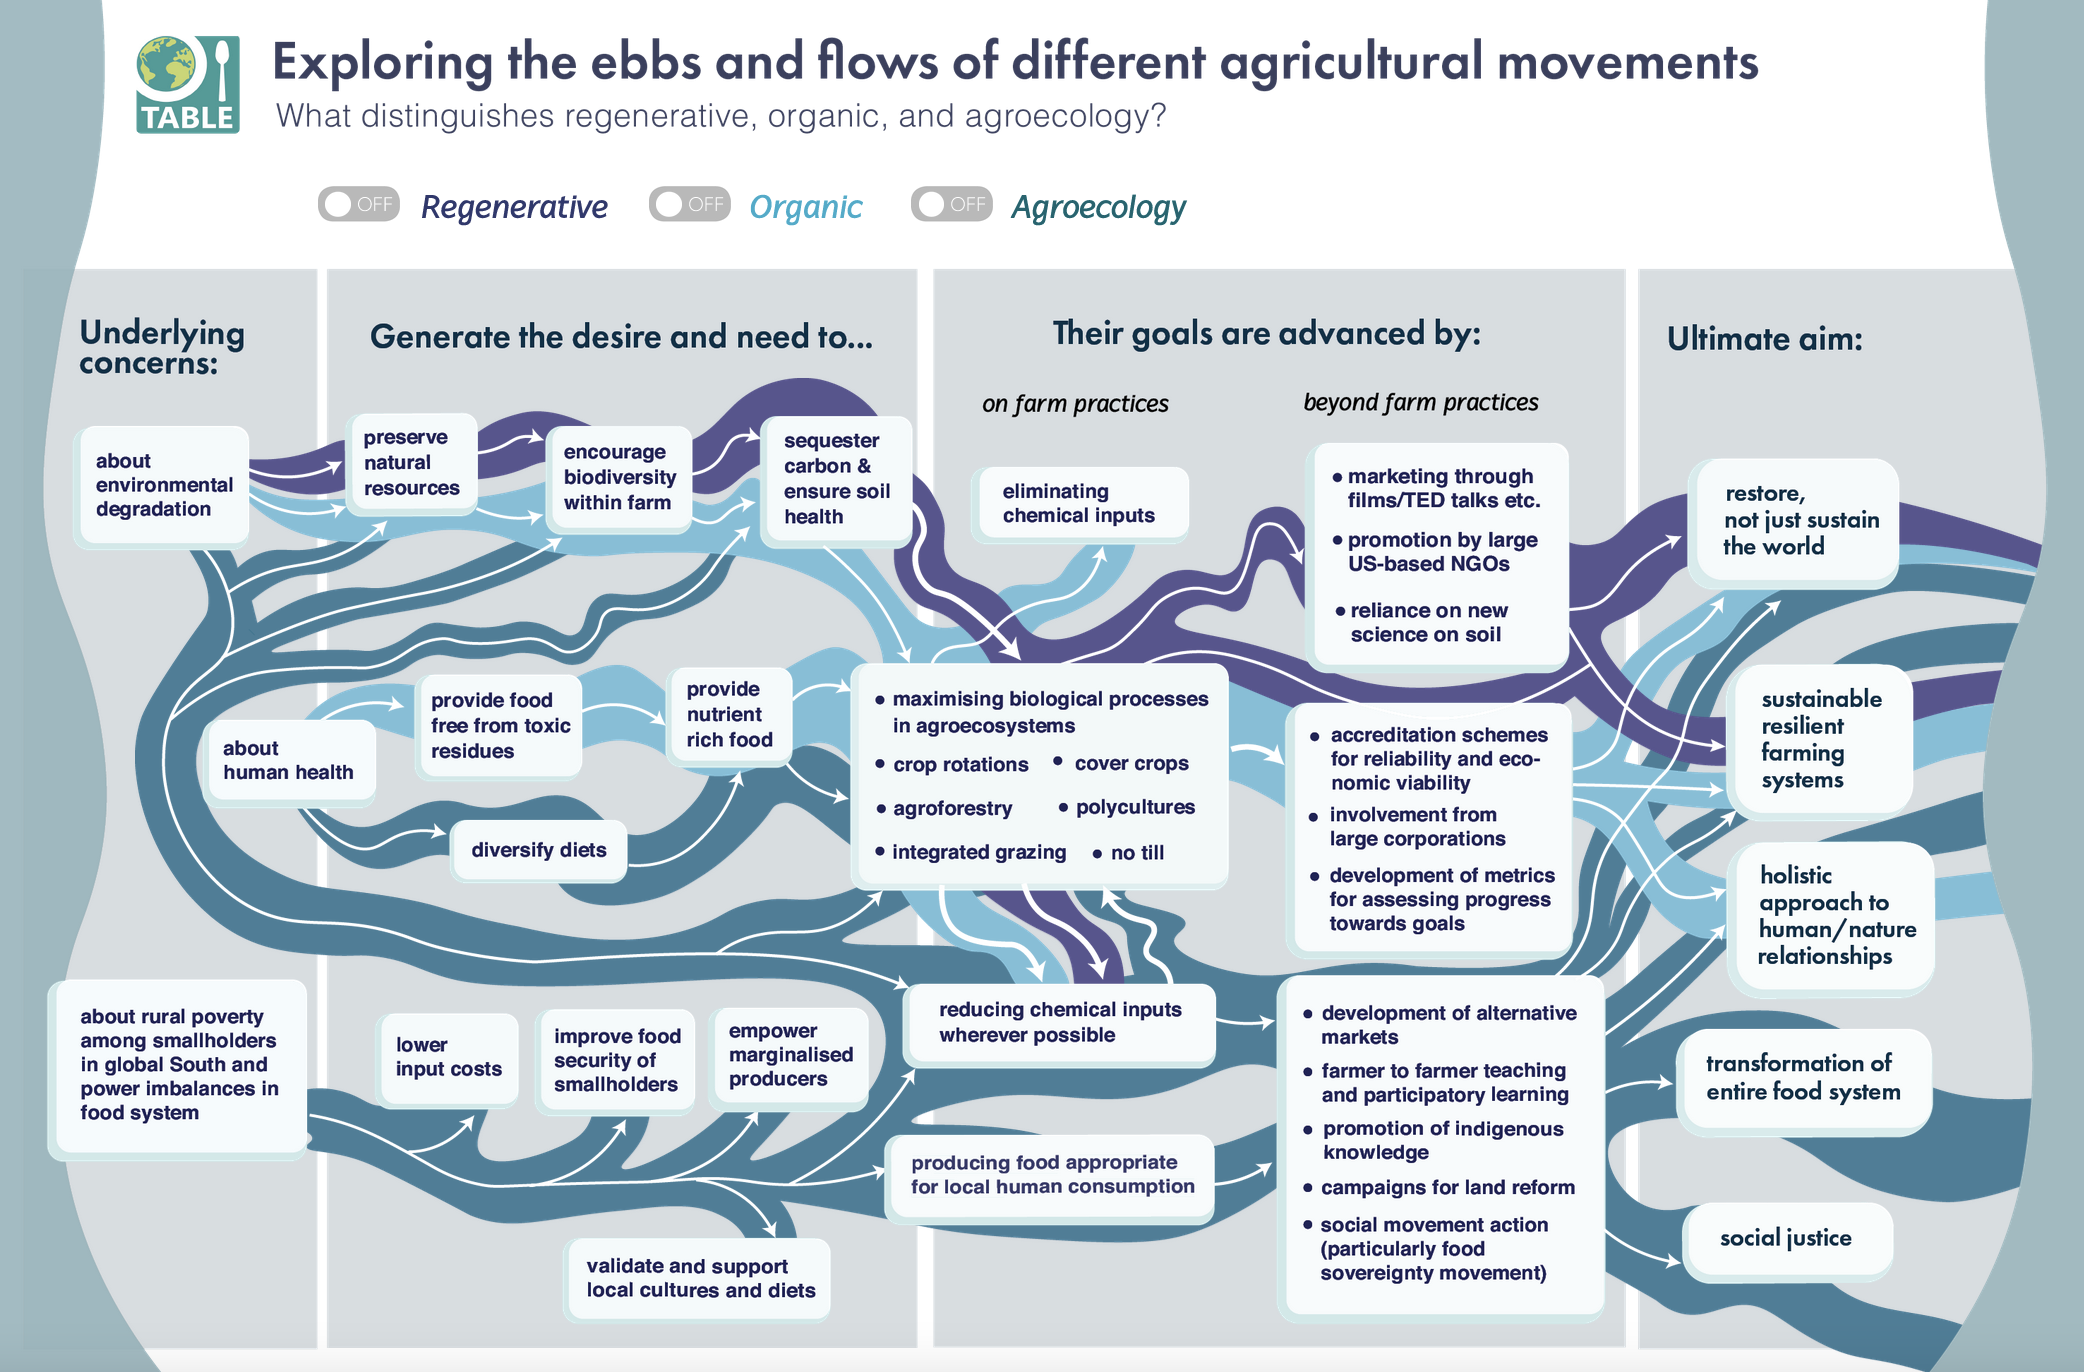 A diagram produced by Table that shows the overlapping and contasting traits of Regenerative, Organic and Agroecology movements.